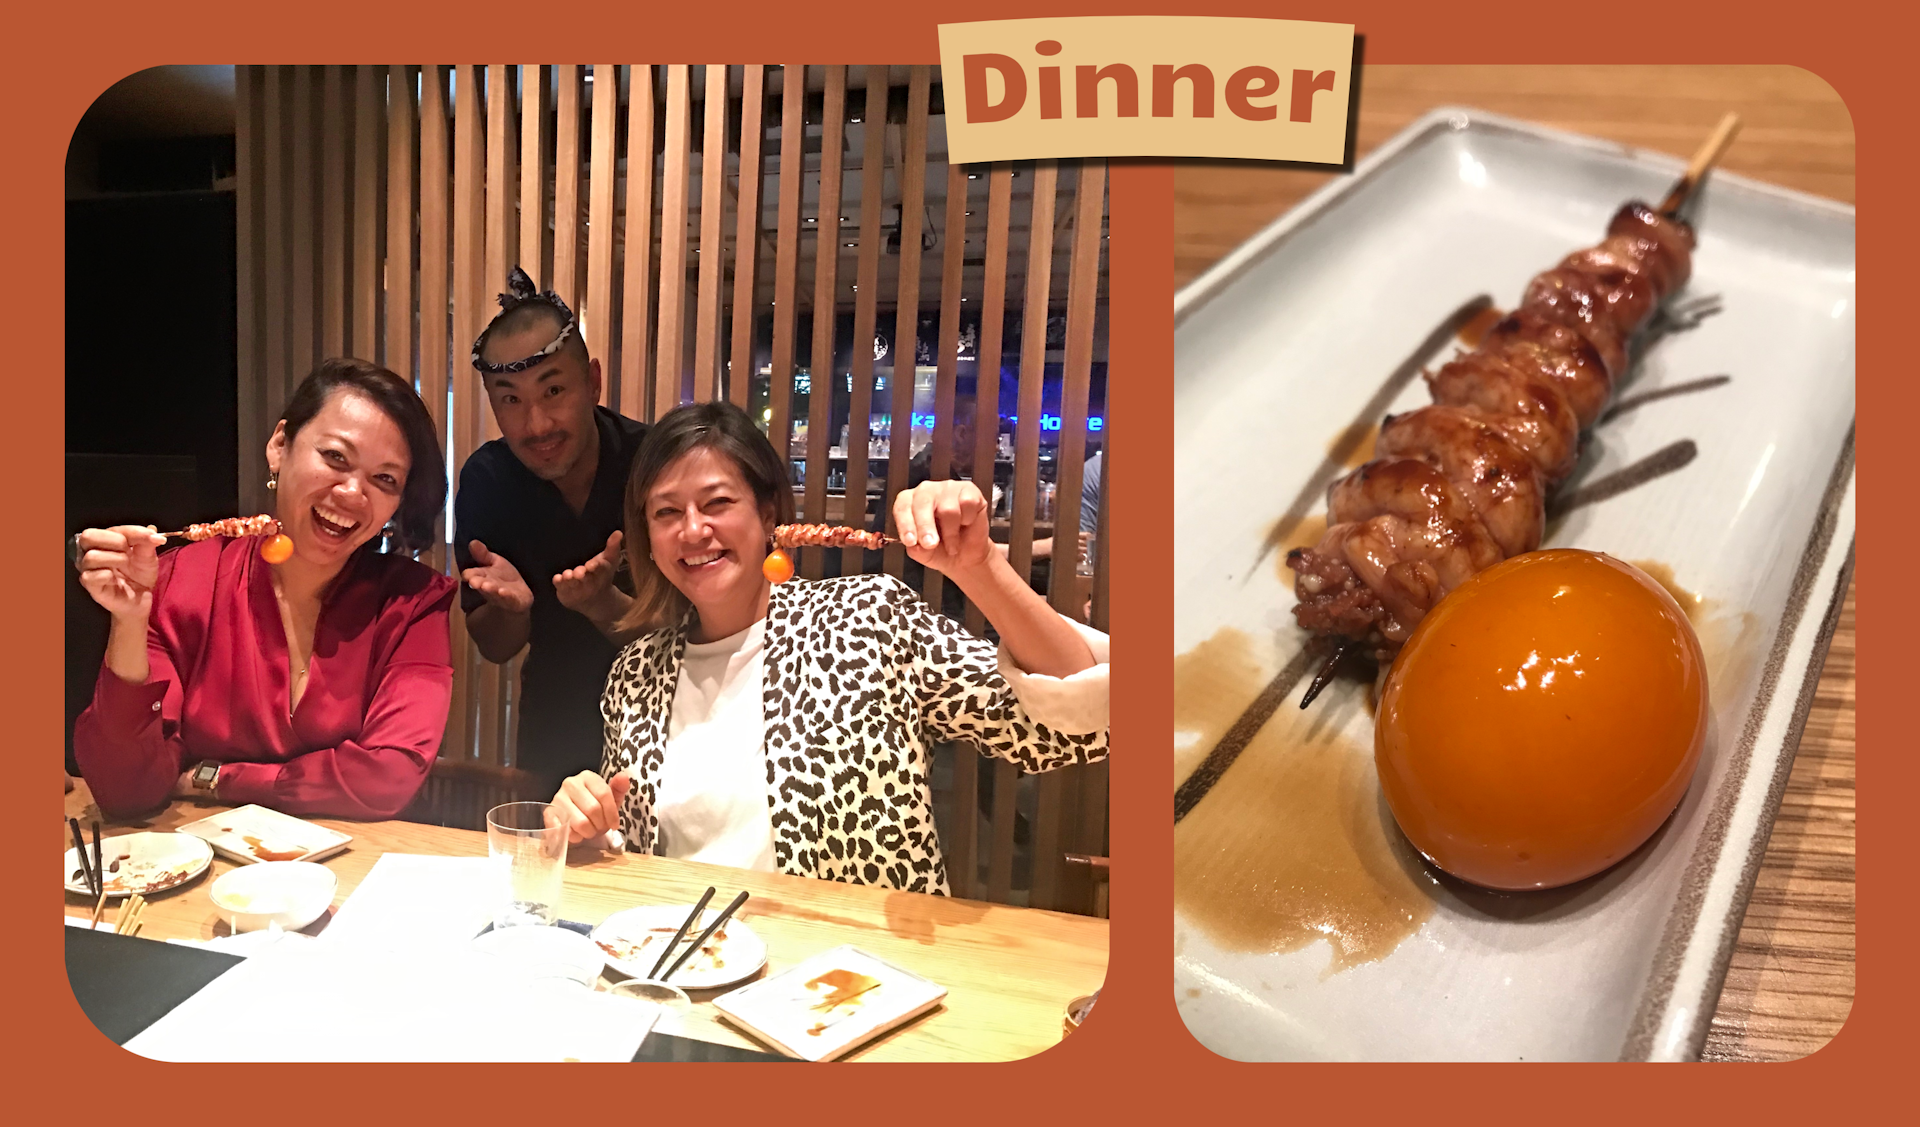 L: two smiling woman pose with the head chef at a Japanese-style restaurant. R: a close-up of a chicken skewer and egg